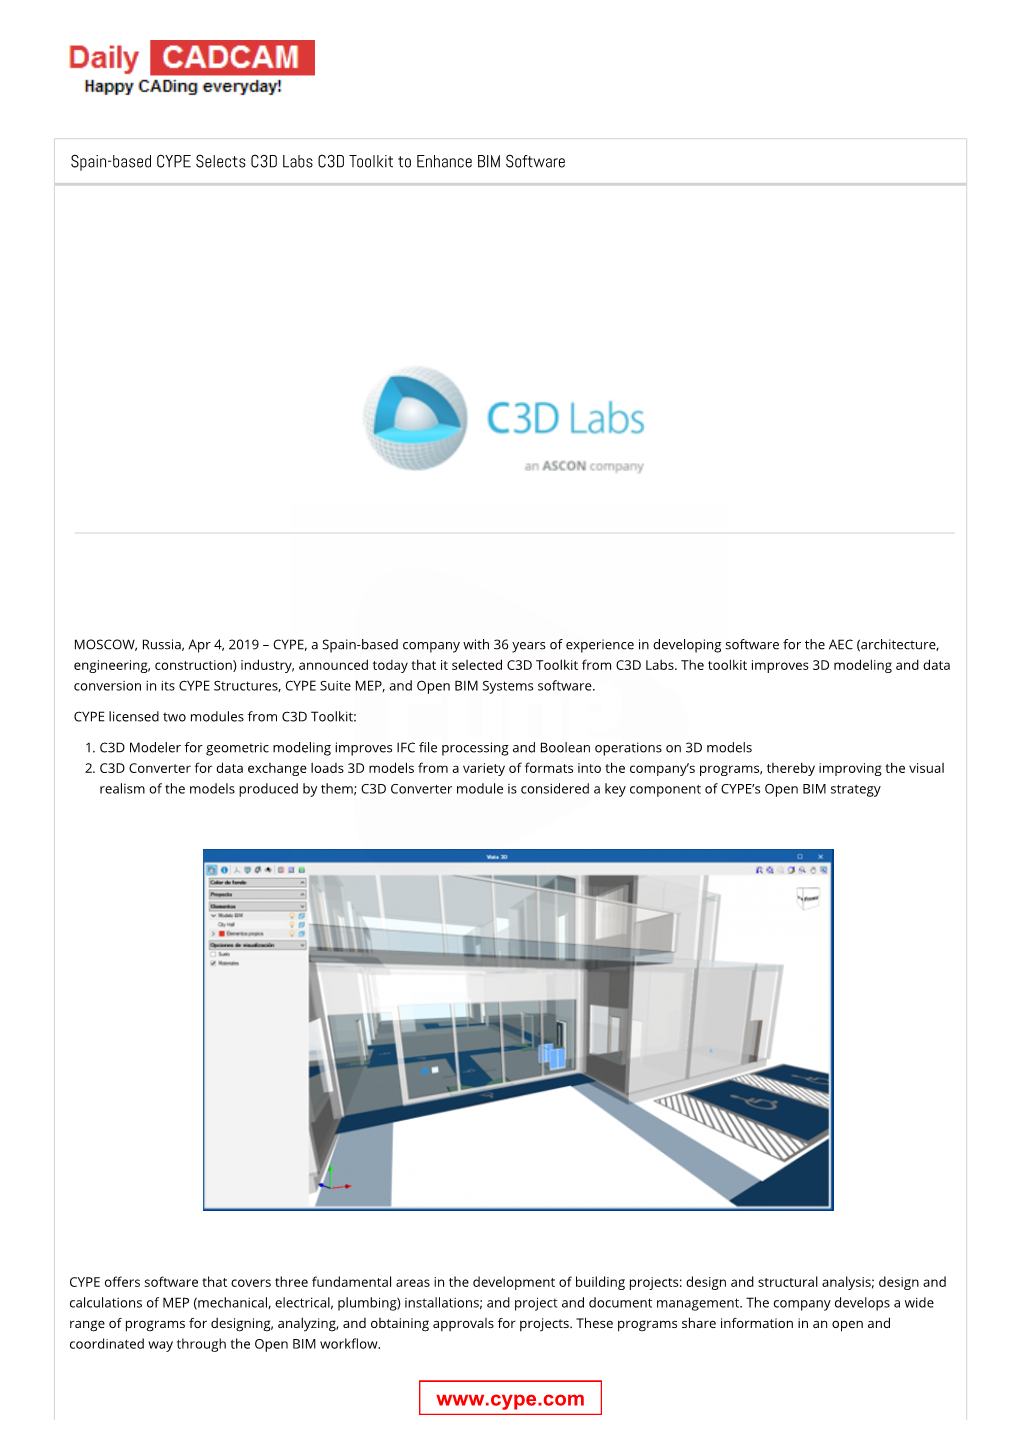 Spain-Based CYPE Selects C3D Labs C3D Toolkit to Enhance BIM Software